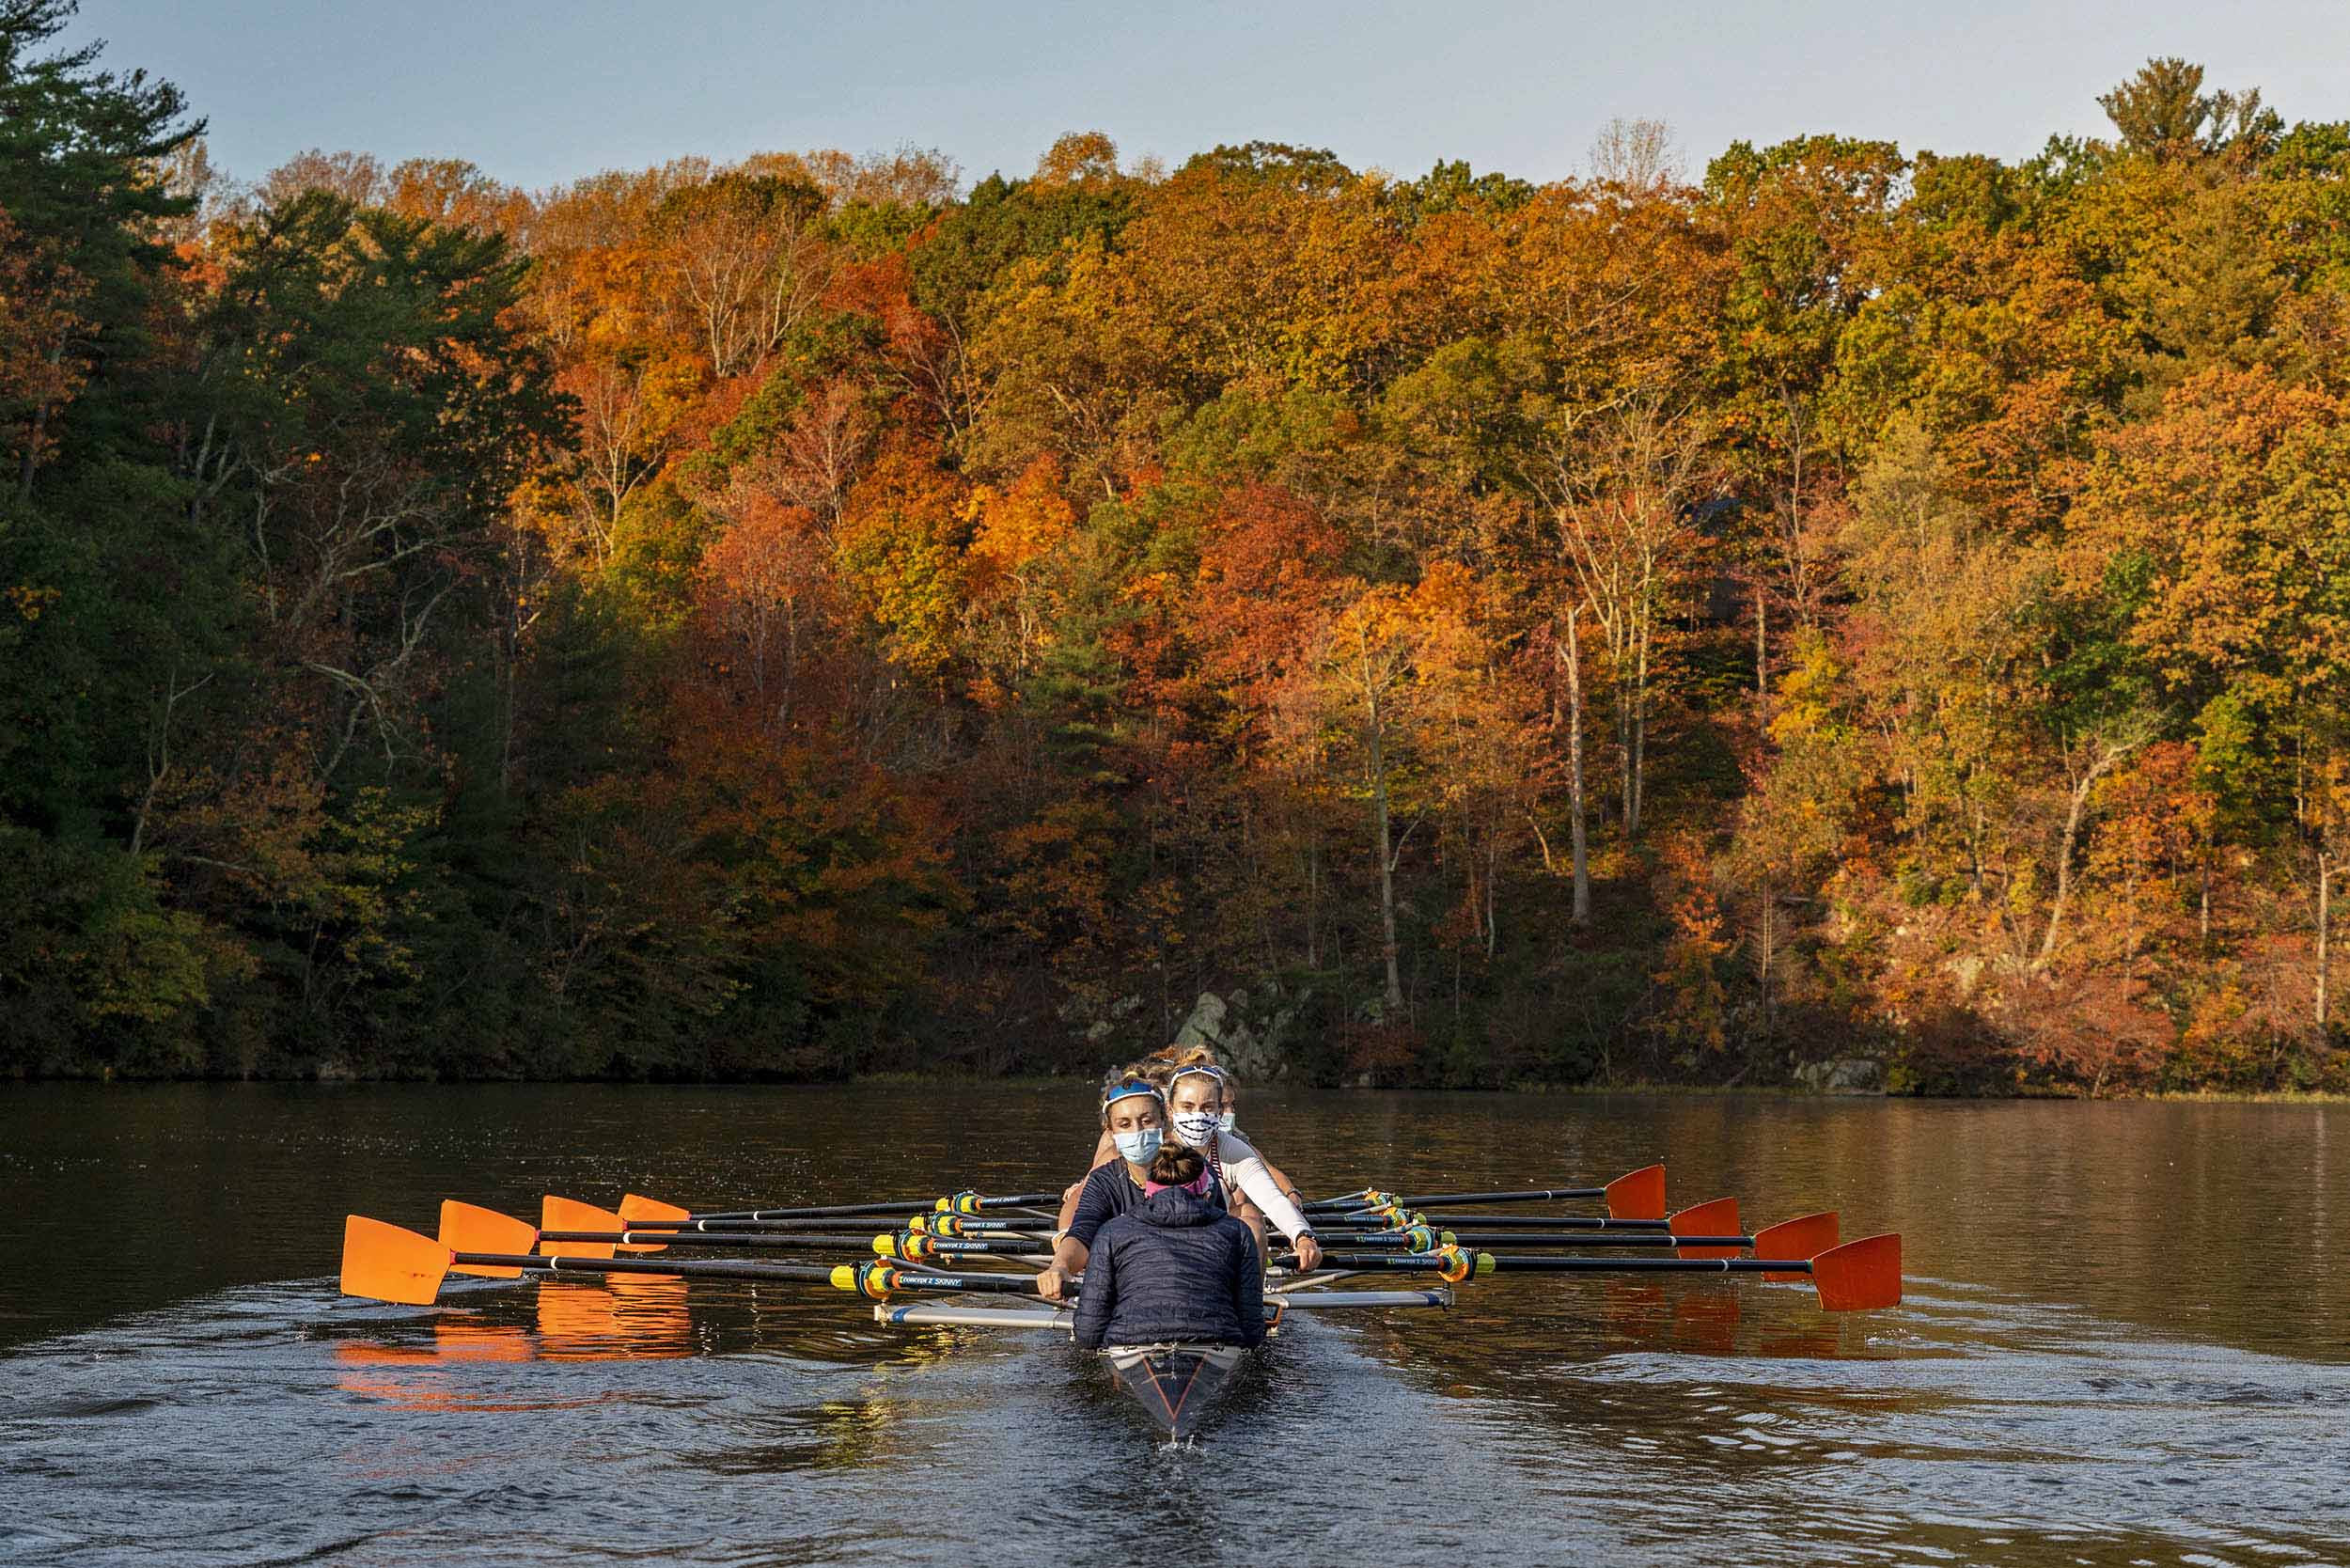 UVA Rowing team on a river surrounded by orange, yellow, and green trees